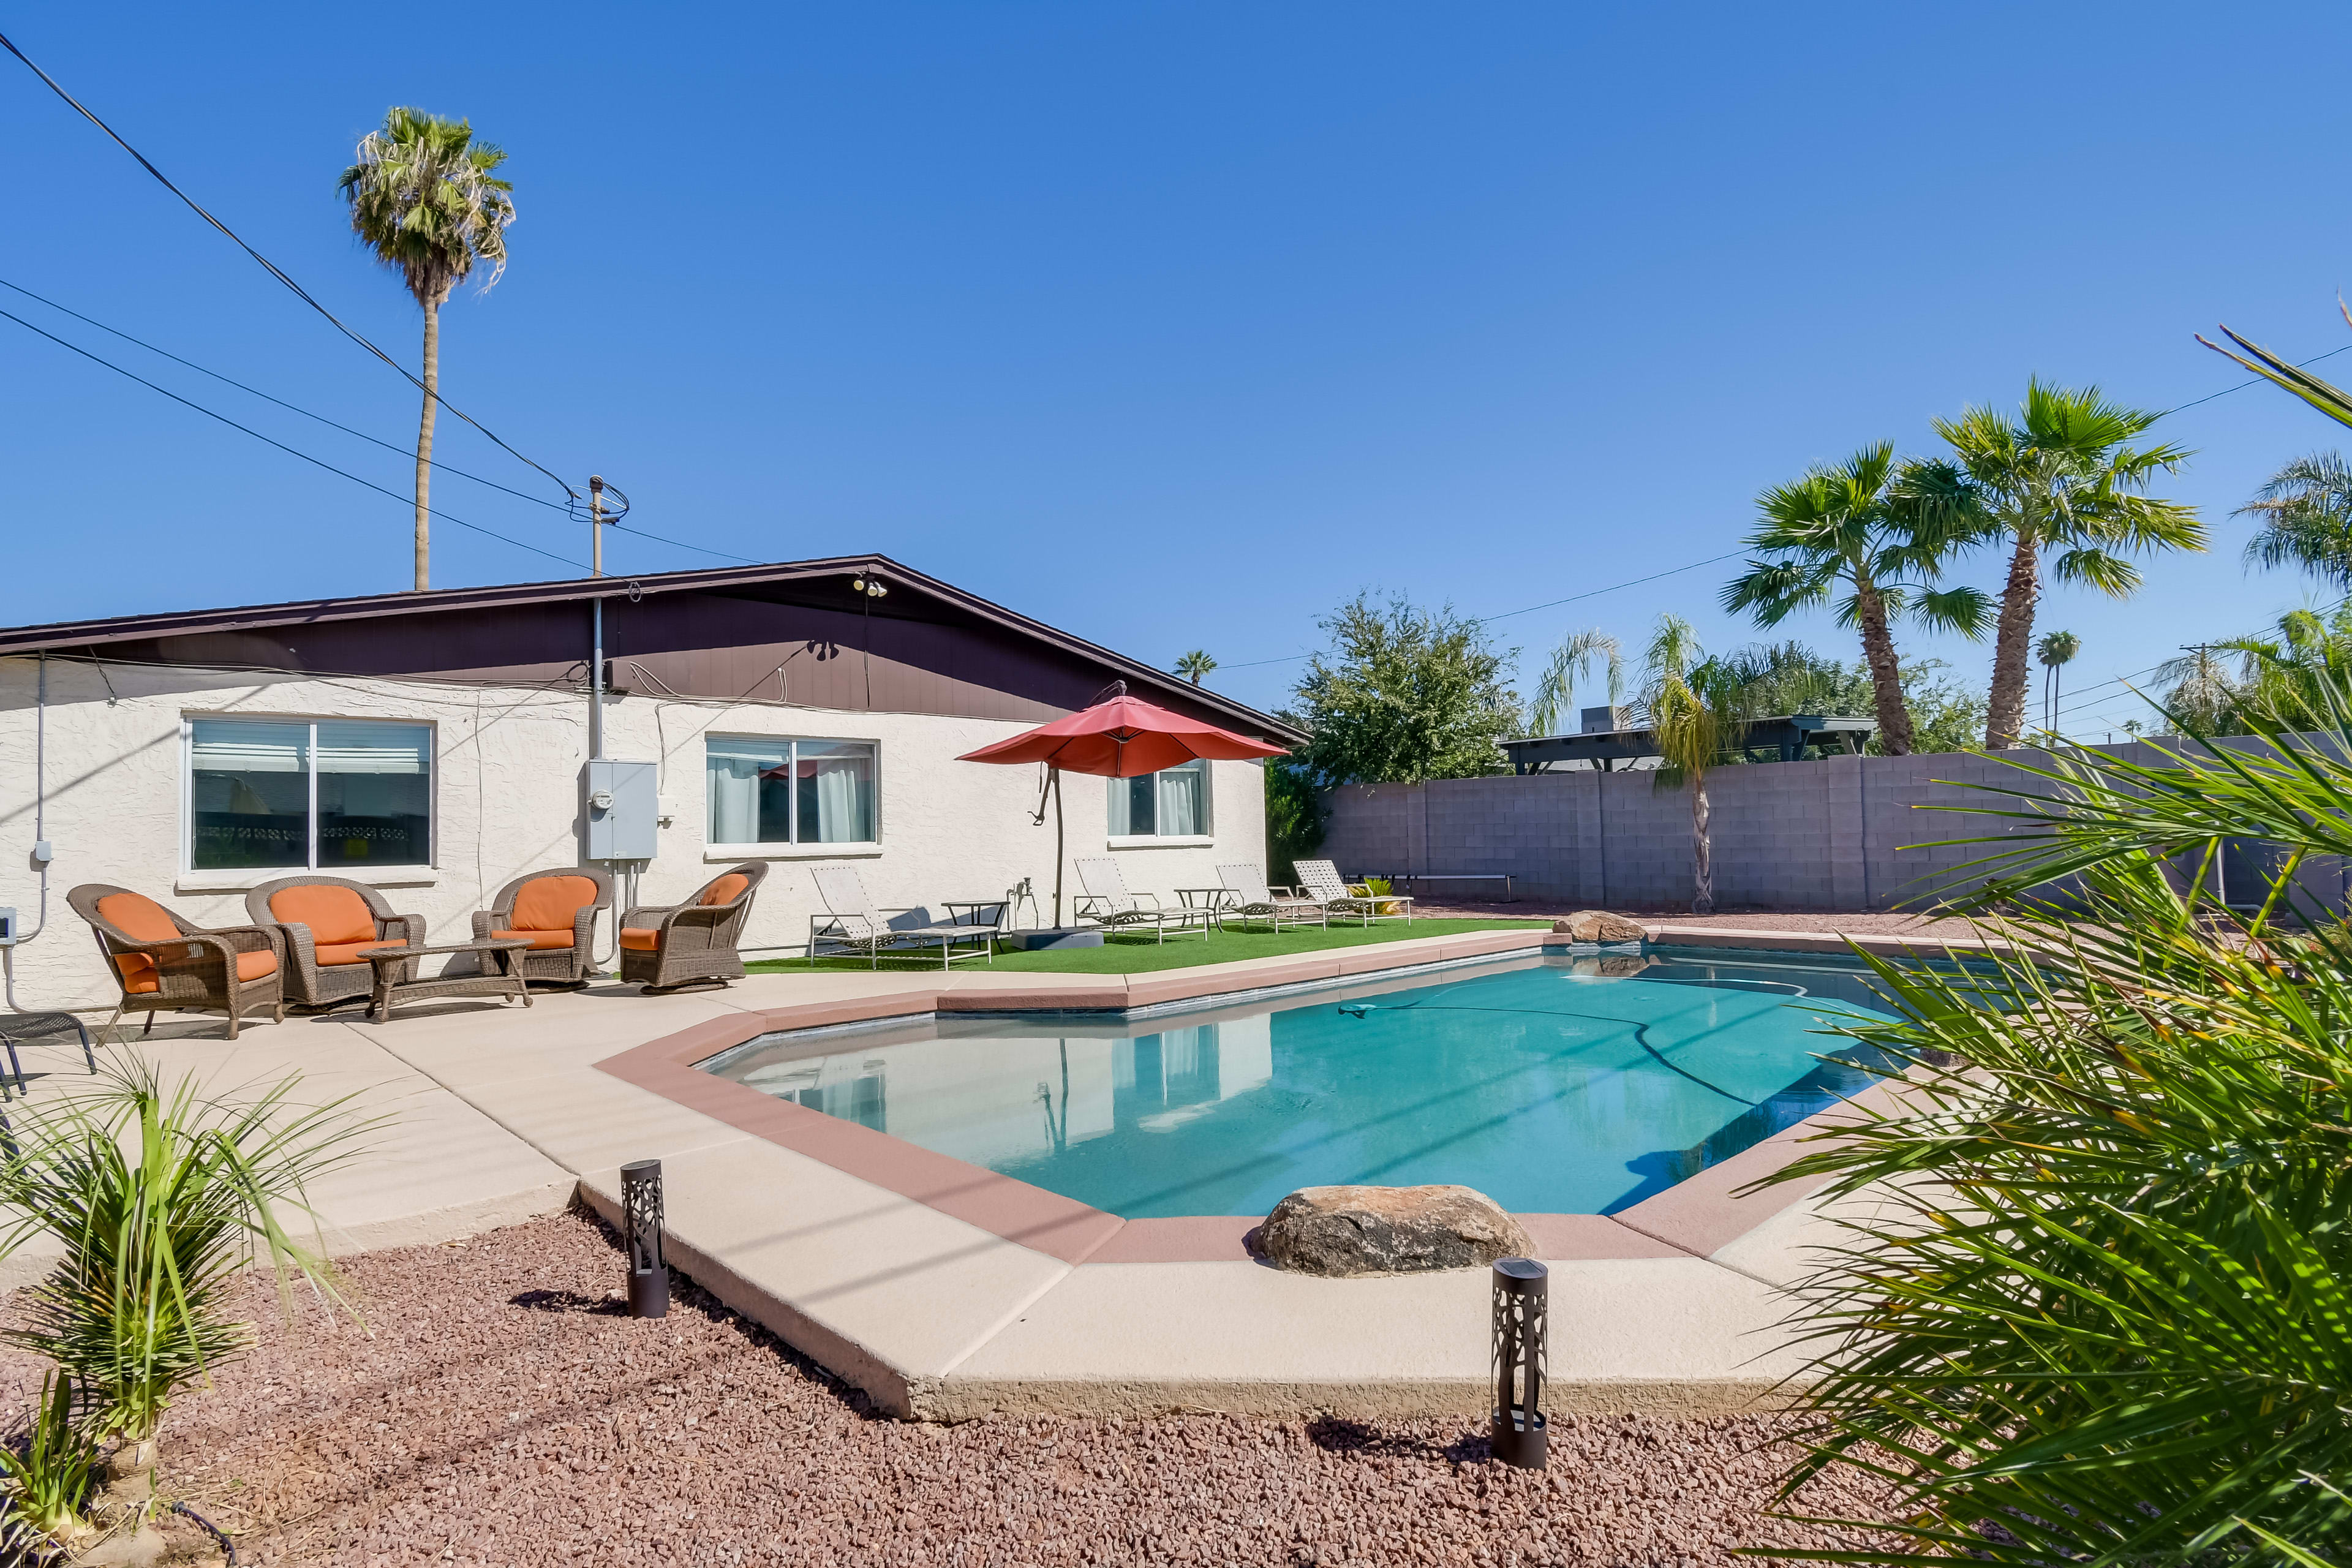 Scottsdale Vacation Rental | 4BR | 2BA | 2,200 Sq Ft | 1 Small Step to Enter